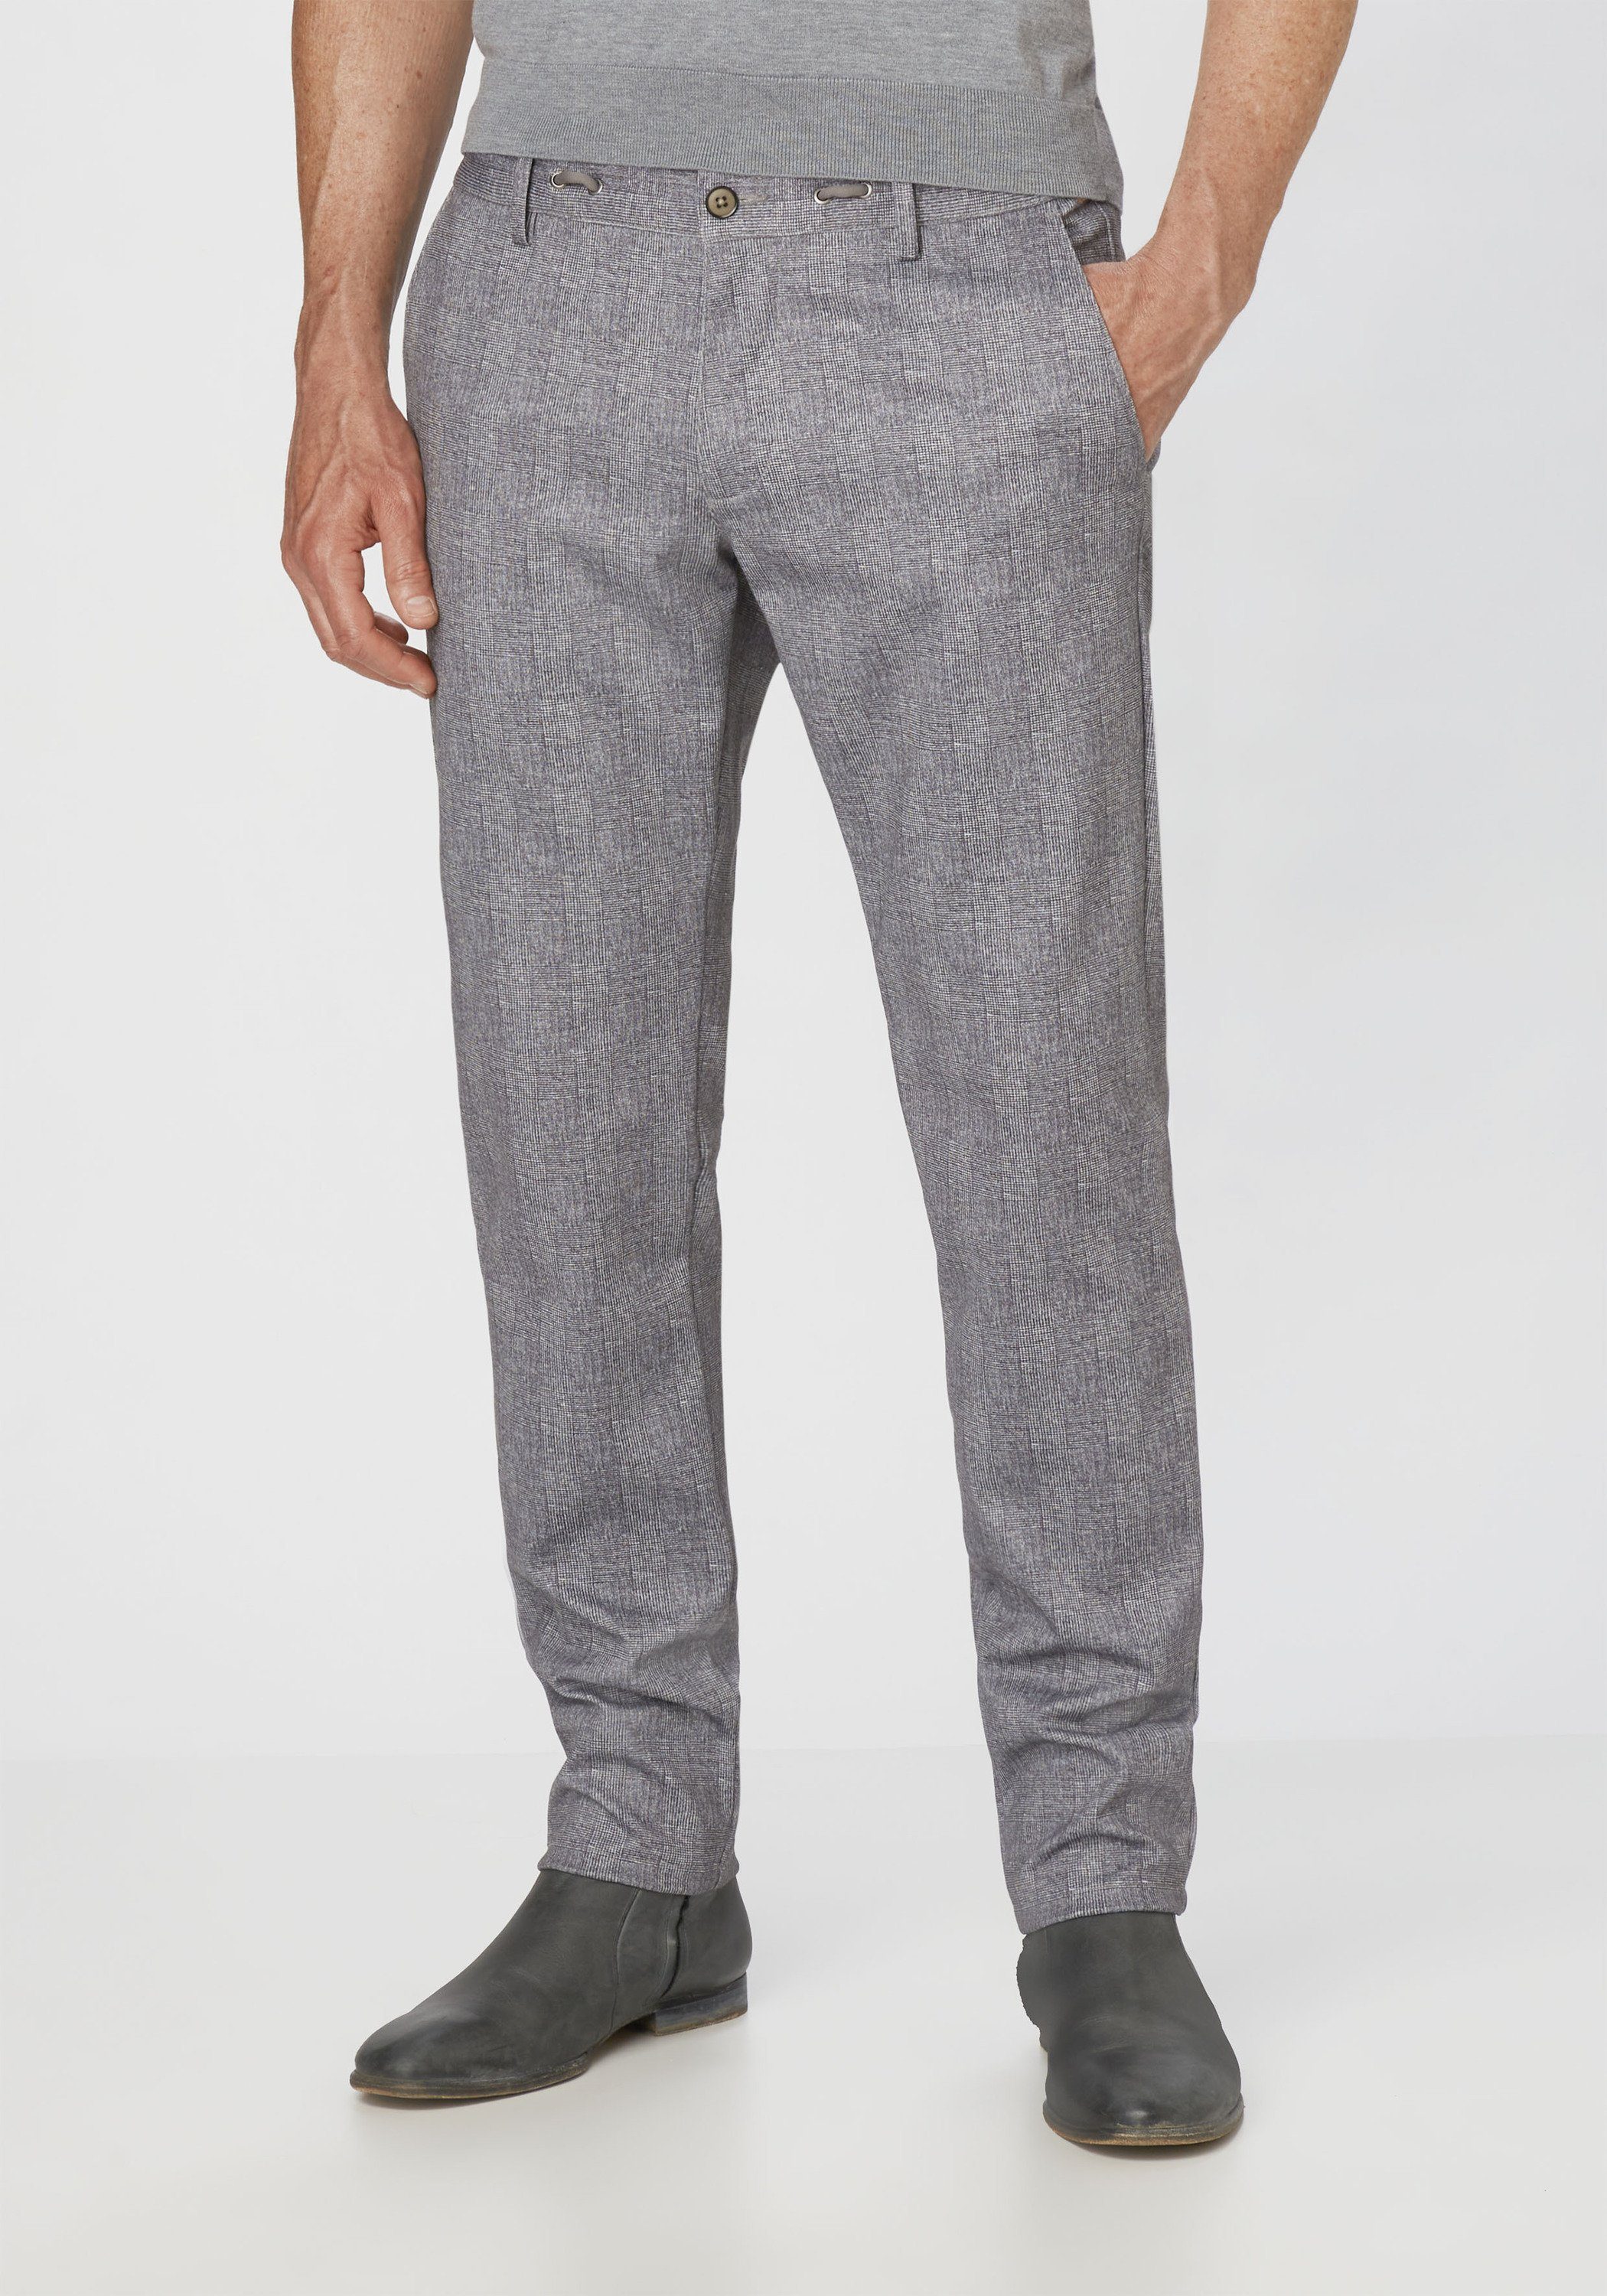 Colwood Jogg Slim-Fit grey Chinohose Karomuster Chinohose mit Redpoint